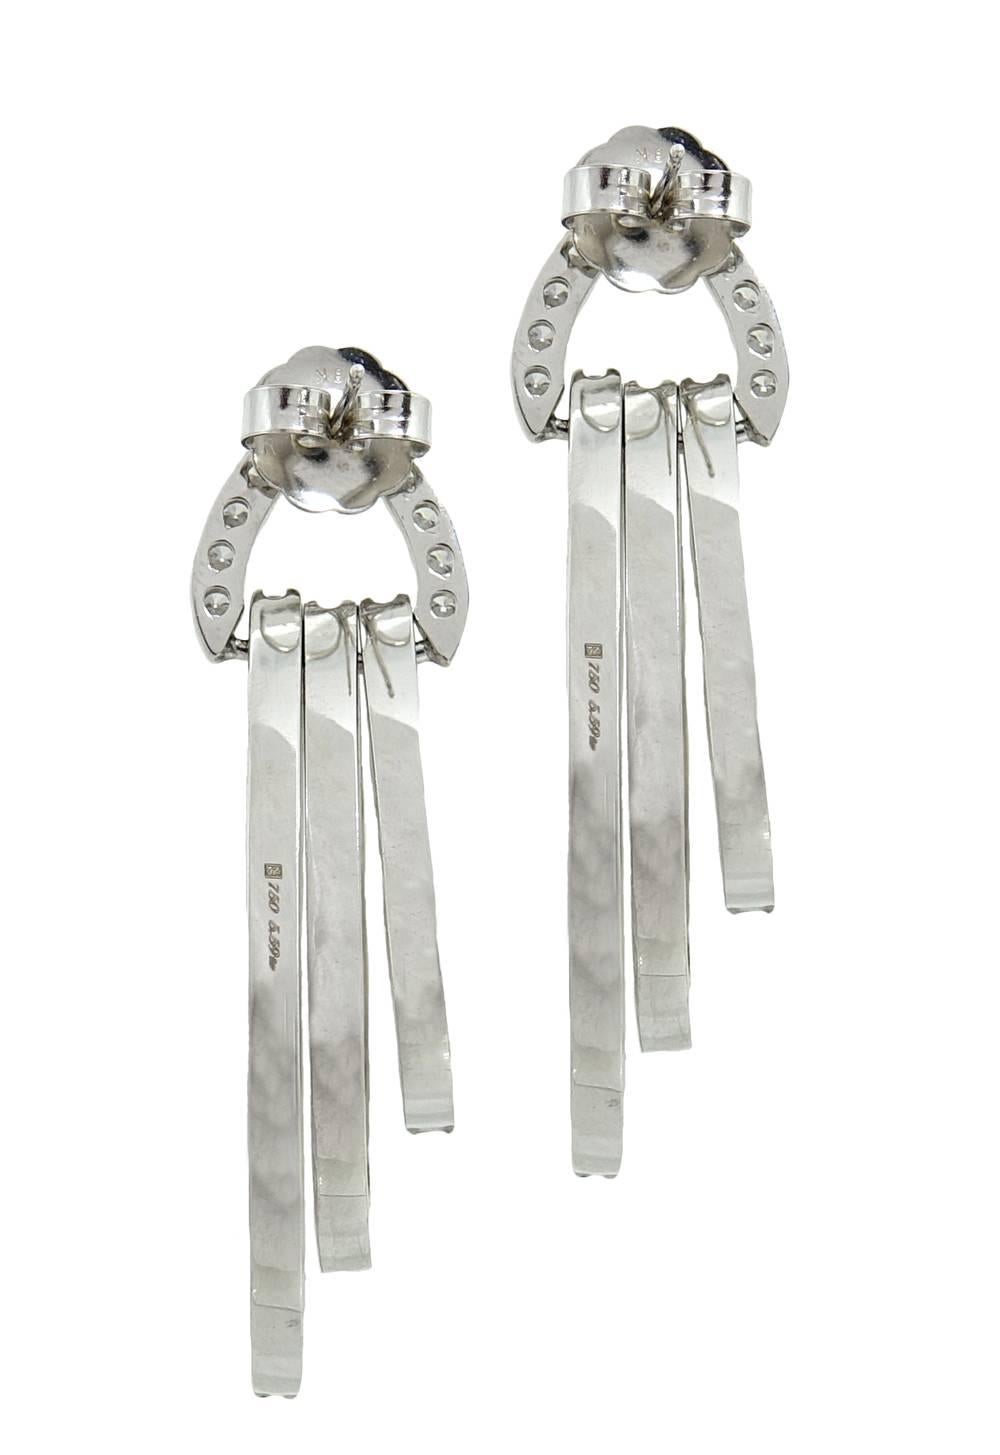 These Chime Like Drop Earrings Are 18K White Gold With a Total Of 126 Sparkling Round Diamonds Weighing A Total Carat Weight Of 5.59 Carats. These Drop Earrings Are About 2 Inches In Length.